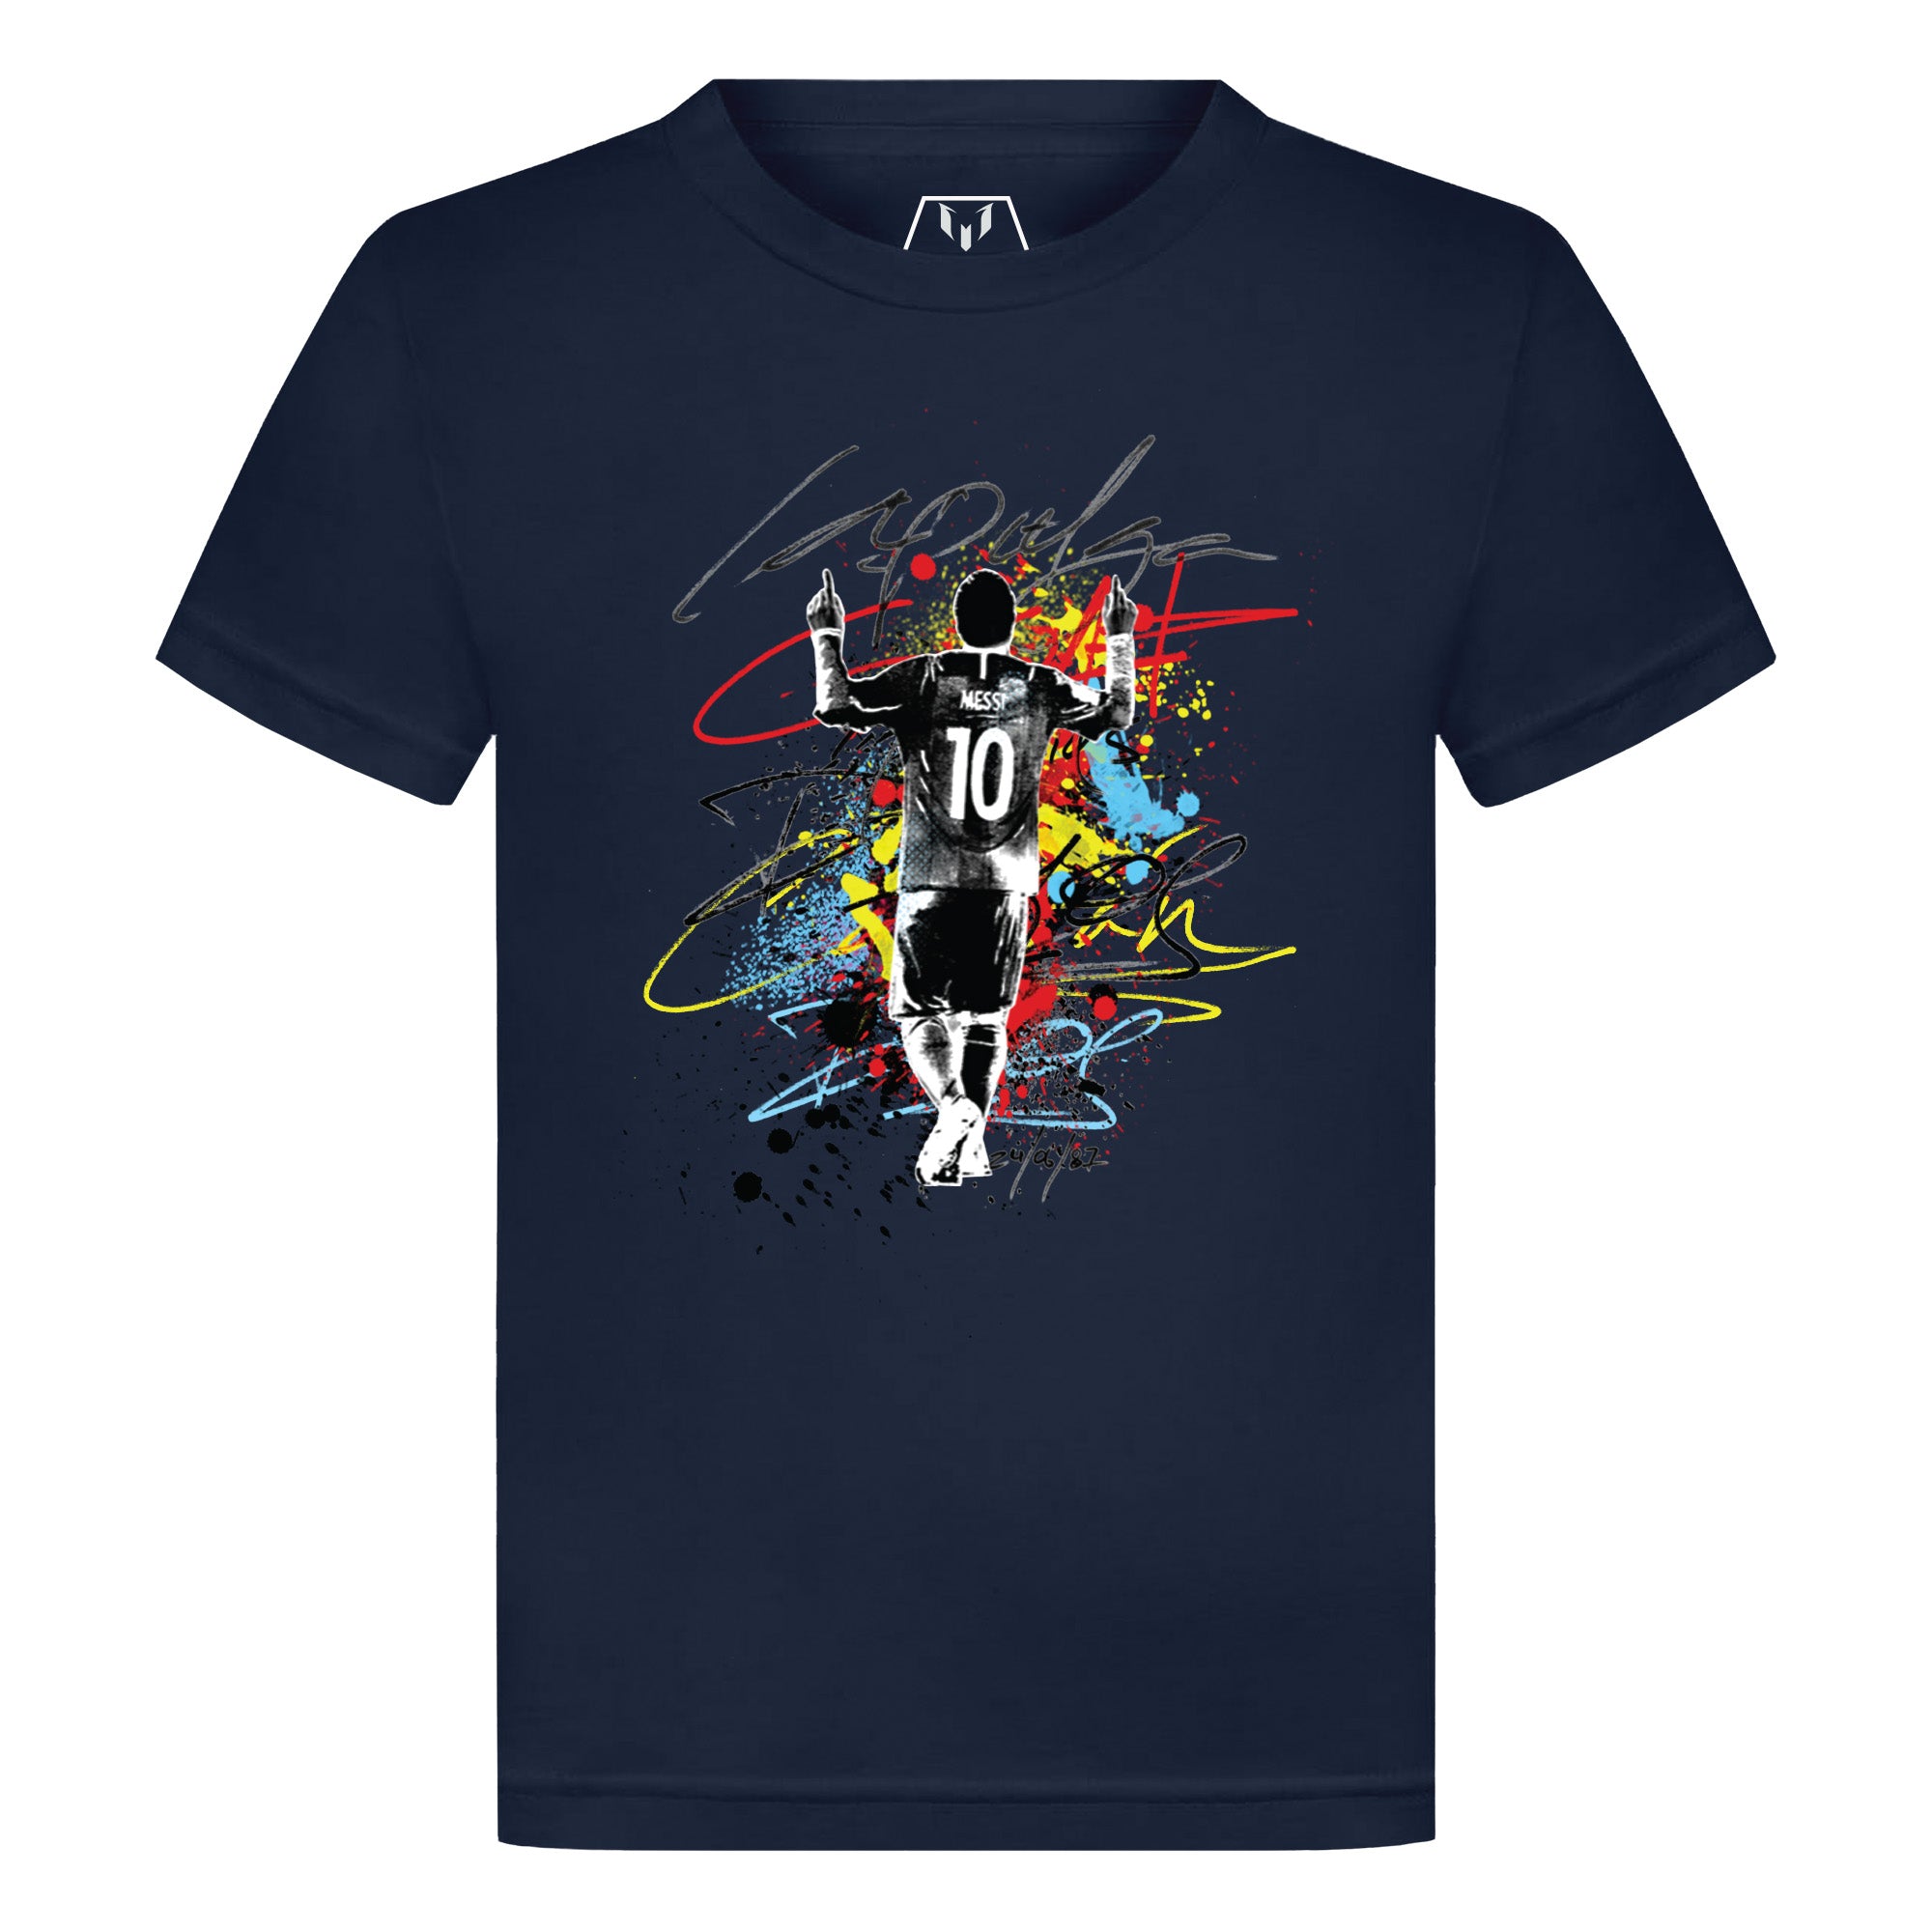 Shop Graphic T-Shirts at The Messi | Messi Store The Store